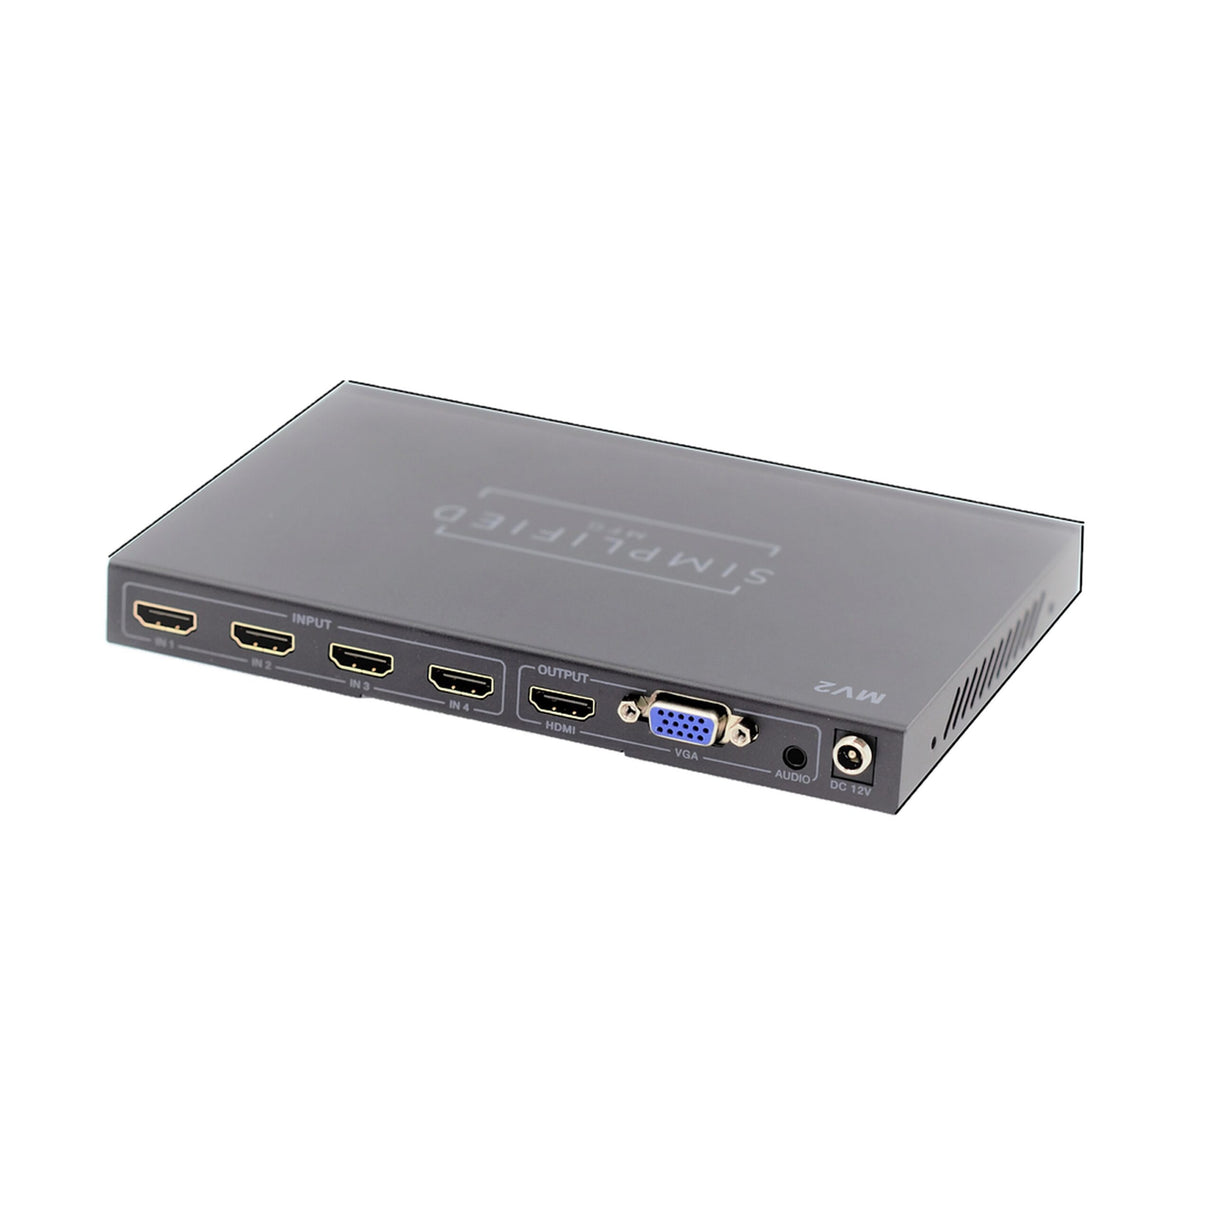 Simplified MFG MV2 HDMI Multi-Viewer With Instant Switching and 4K Output